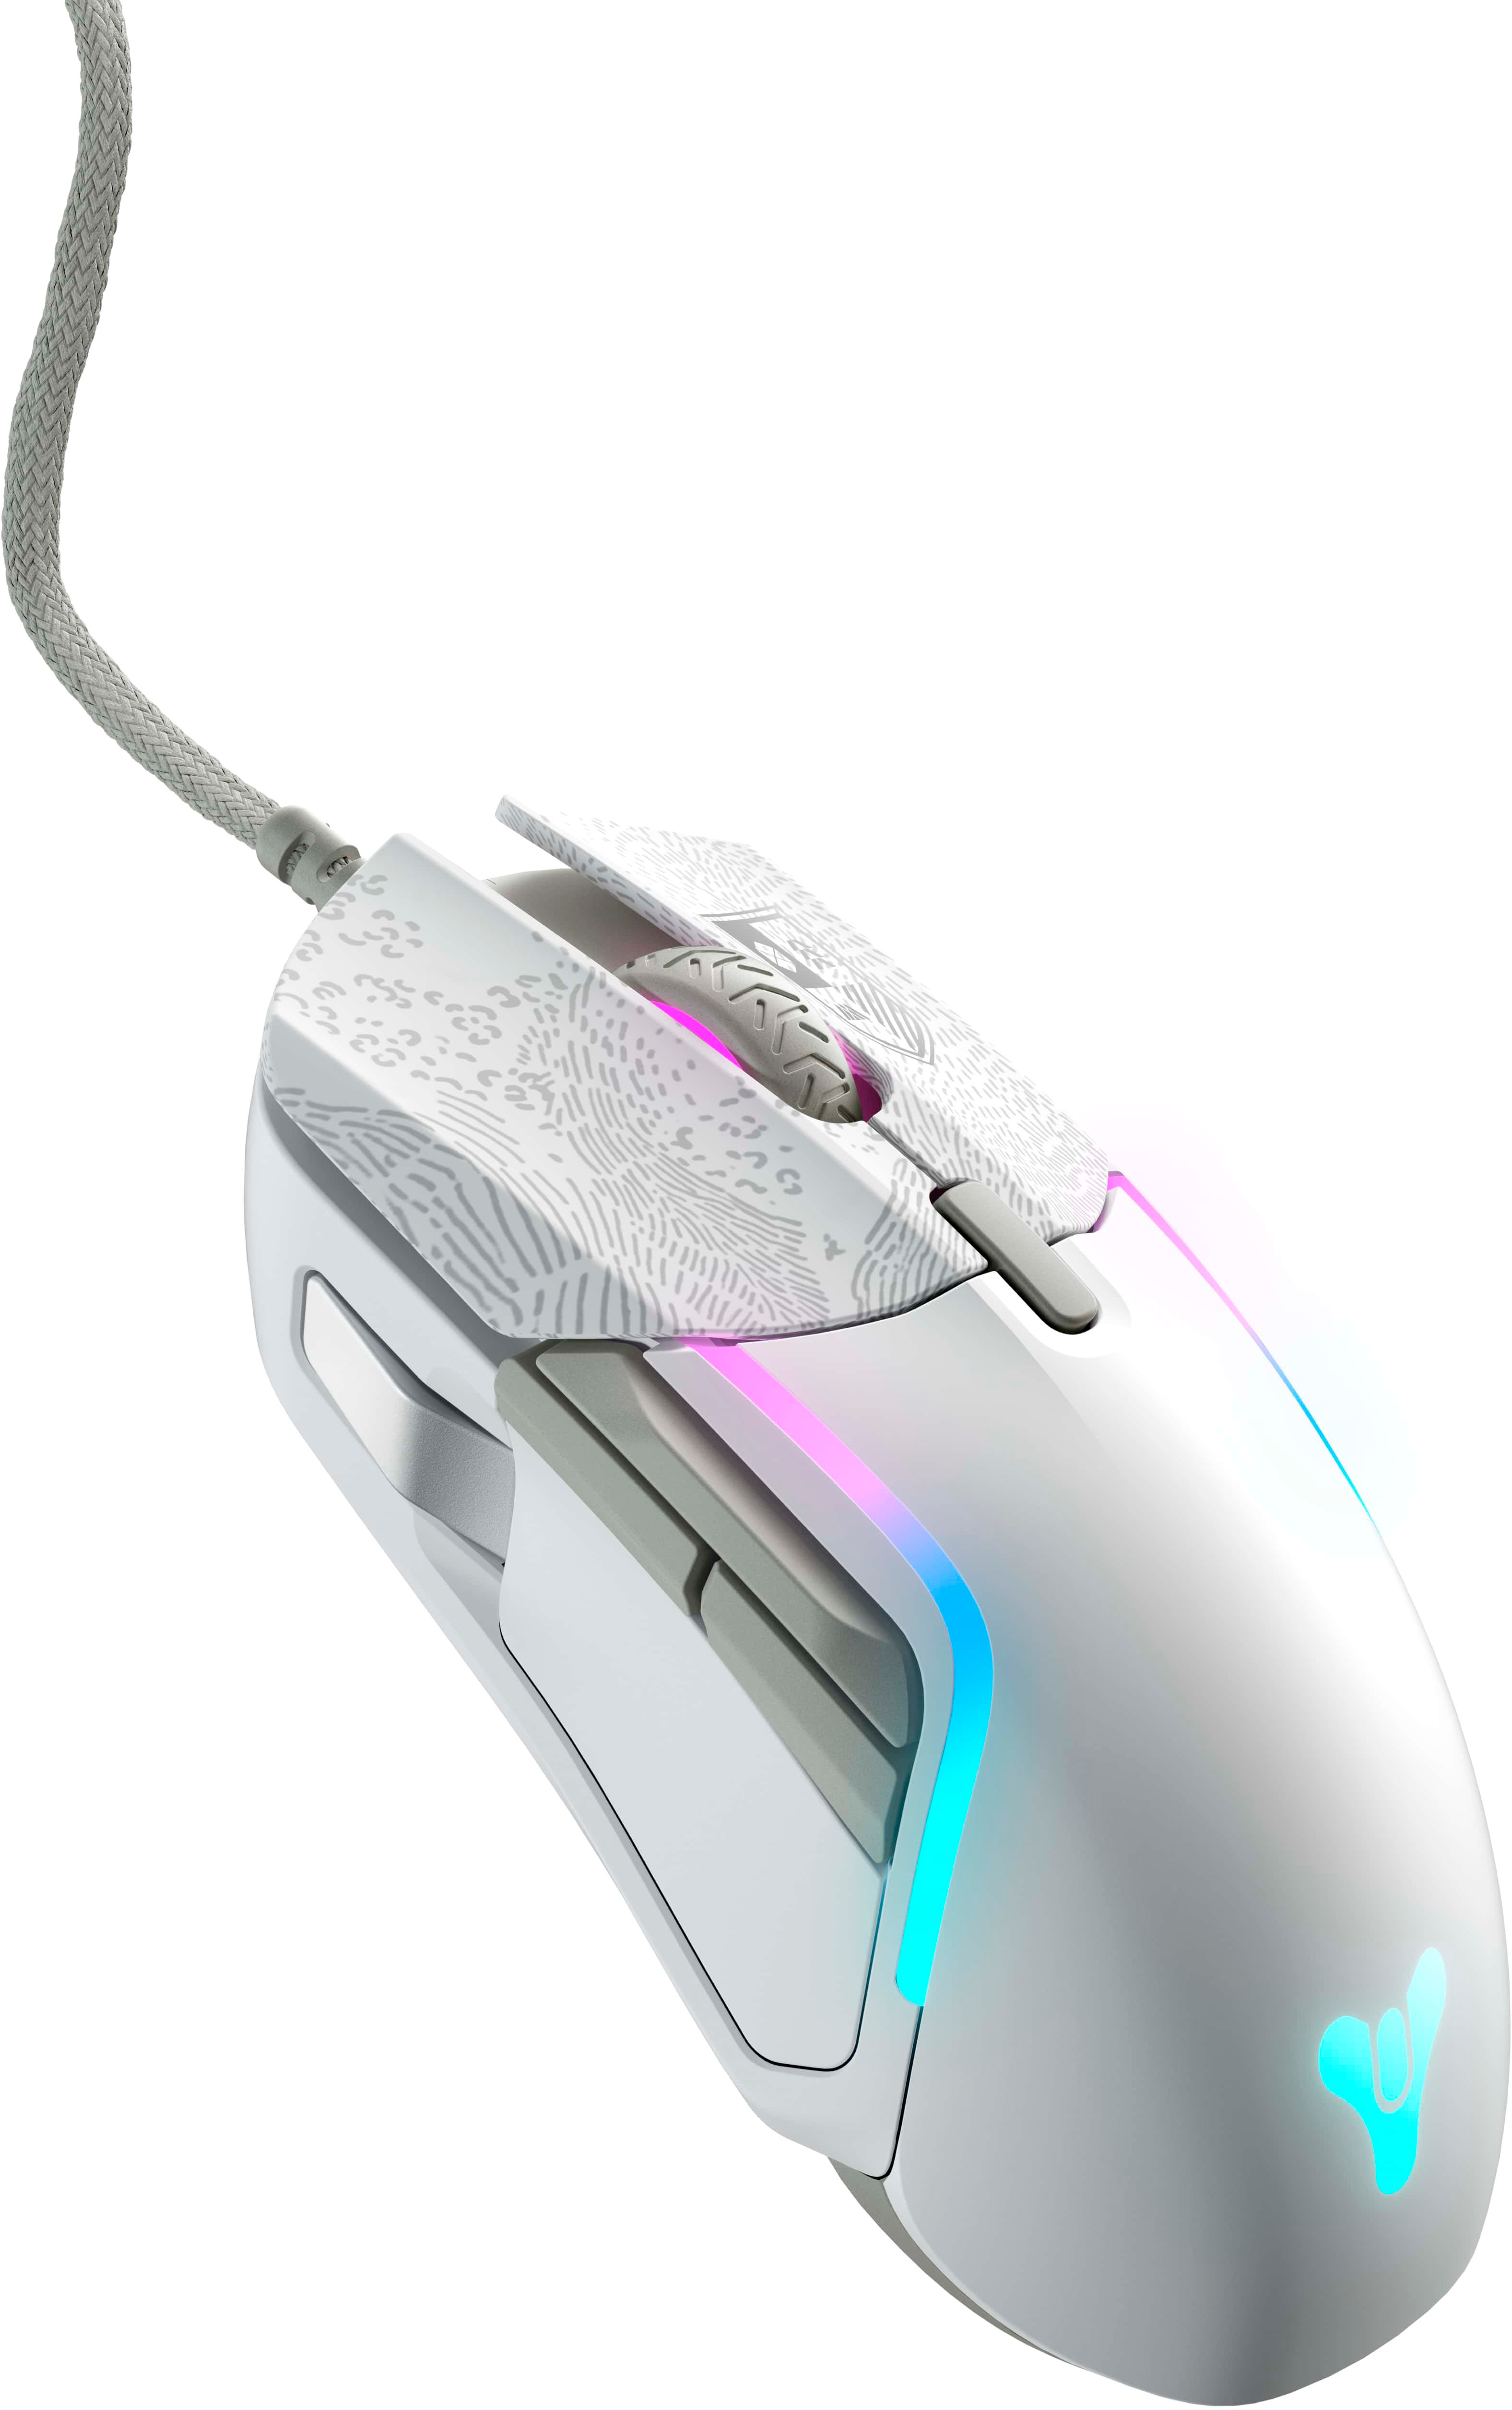 Angle View: SteelSeries - Rival 5 Wired Optical Gaming Mouse with RGB Lighting - Destiny 2 Edition